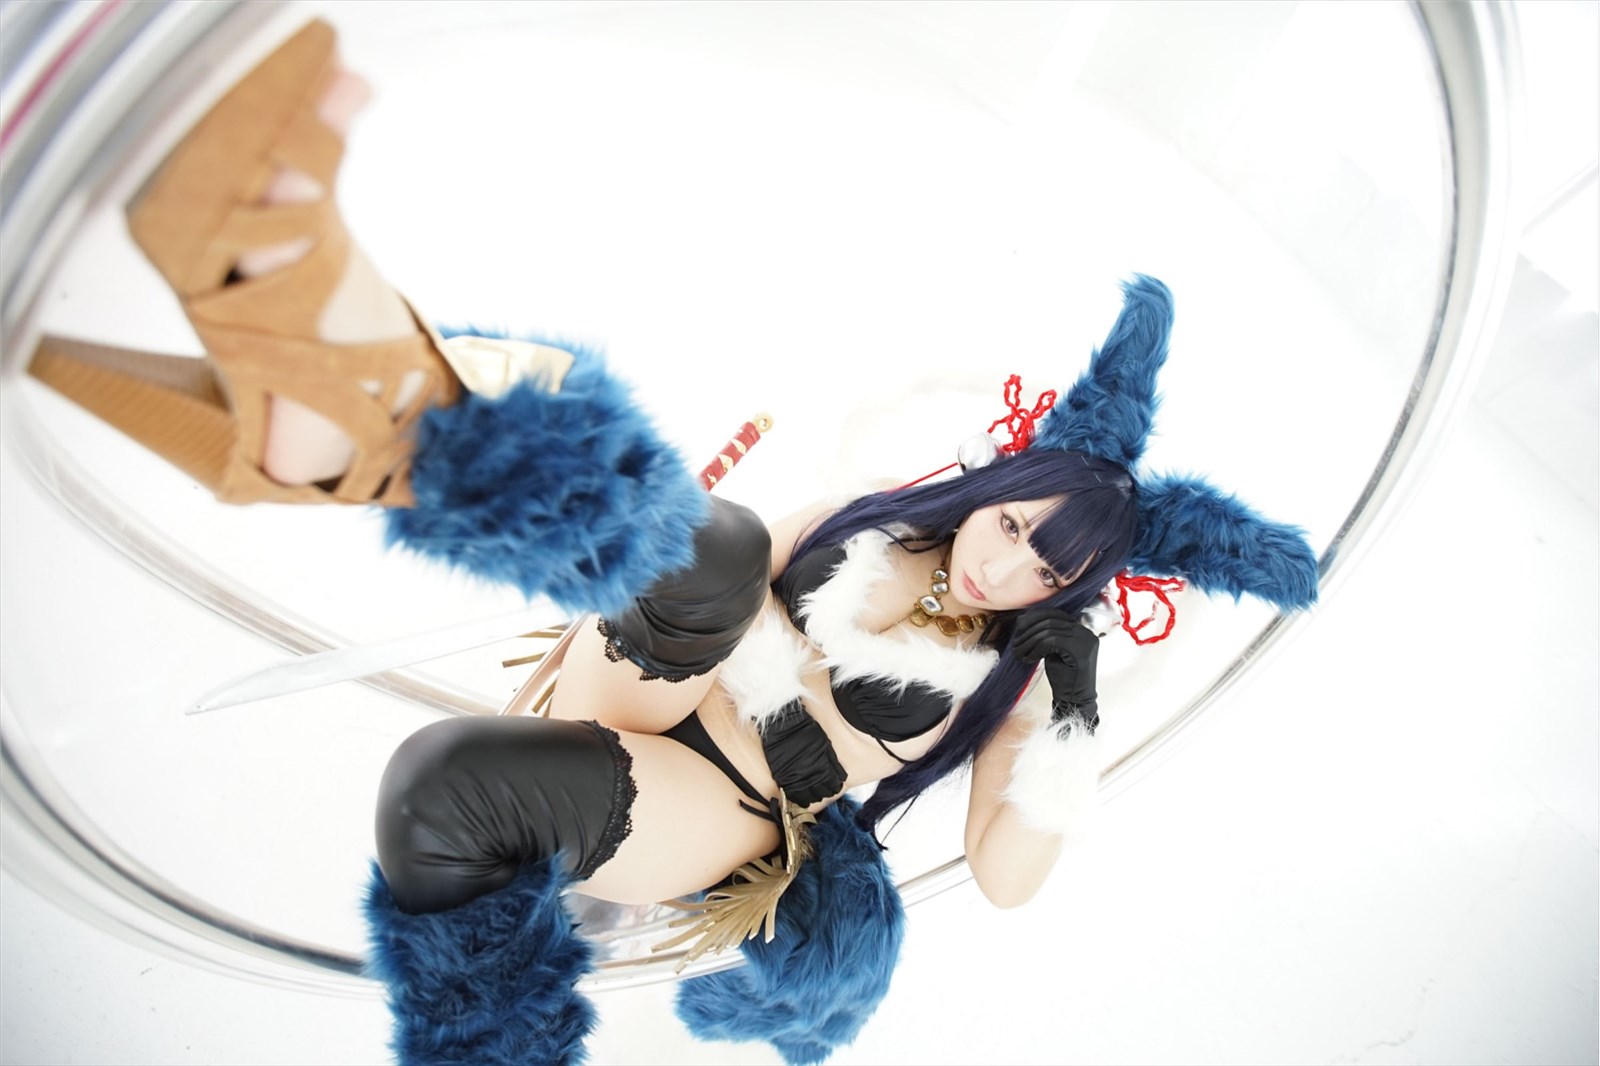 (Cosplay) (C91) Shooting Star (サク) TAILS FLUFFY 337P125MB2(21)